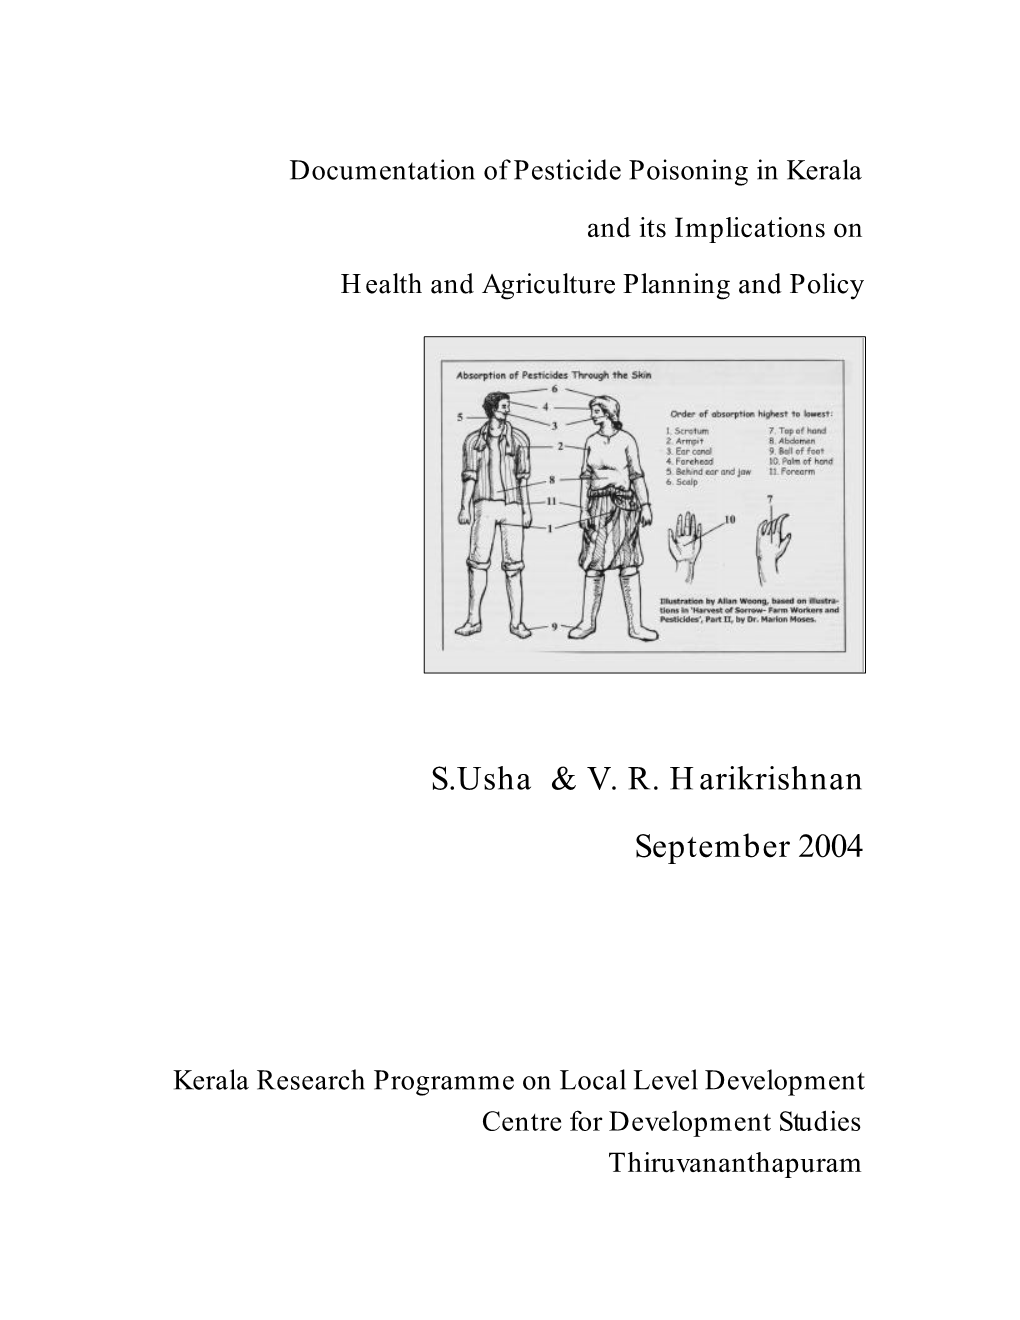 The Intensity of Agrochemical Use in Crops of Kerala